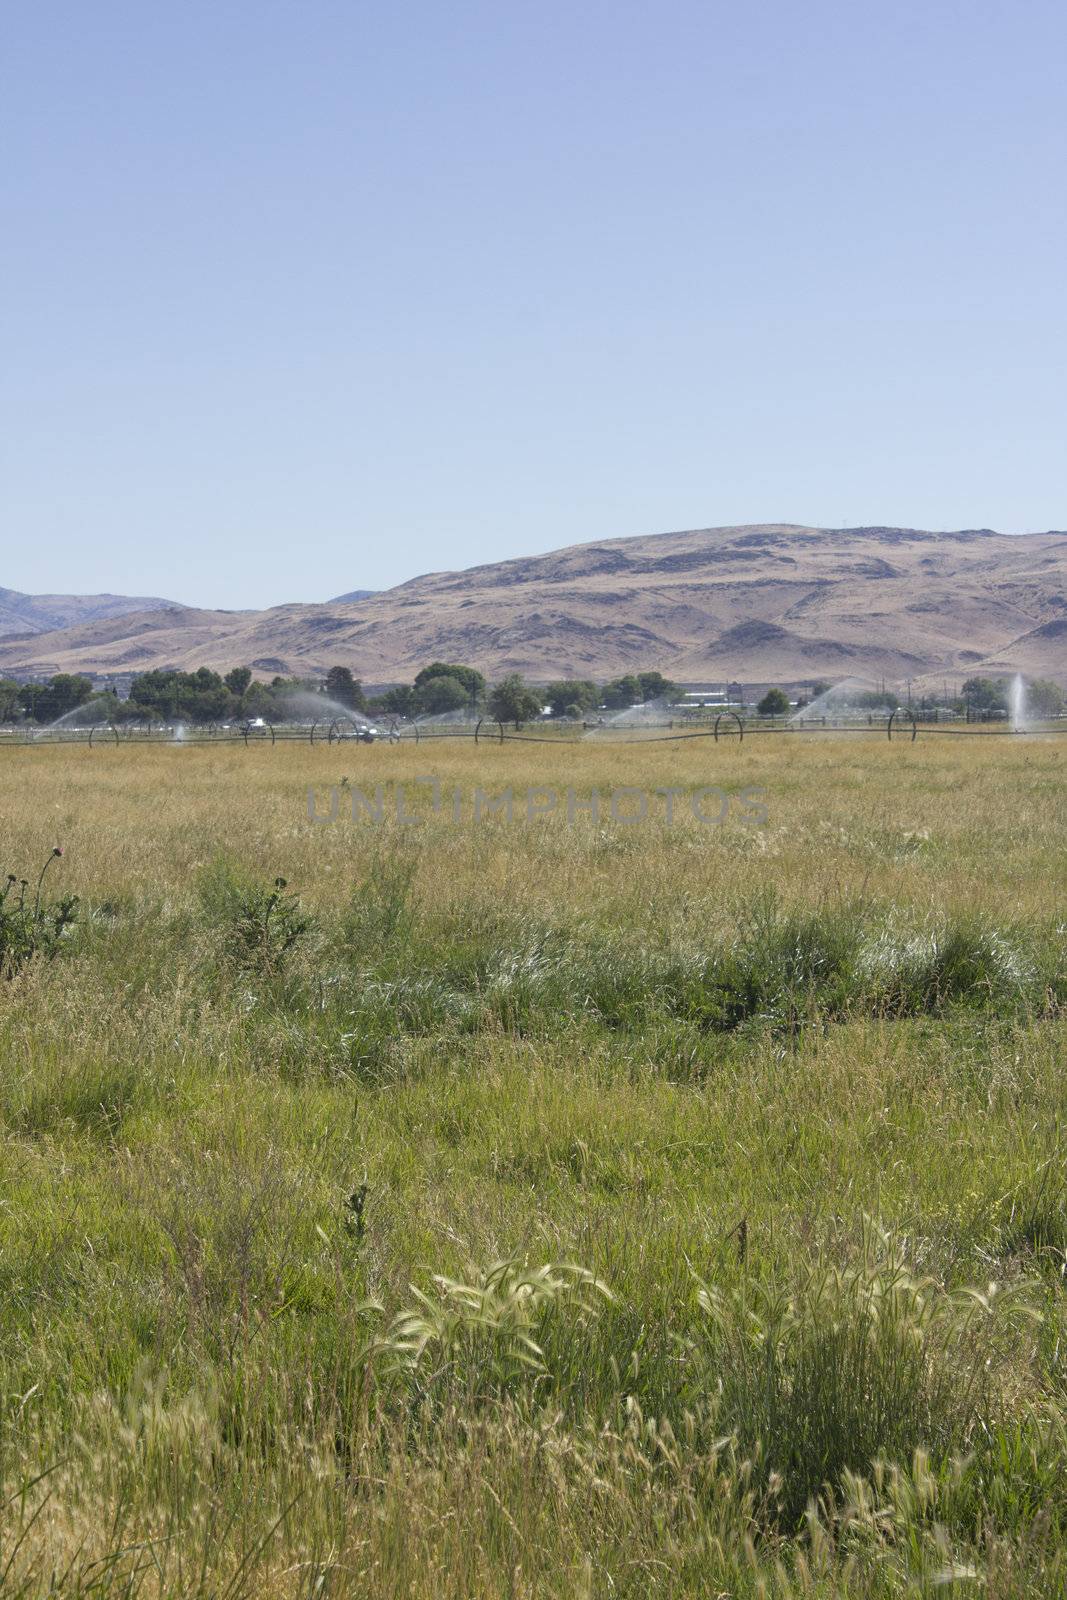 Large area of land crops being watered in front of mountains.